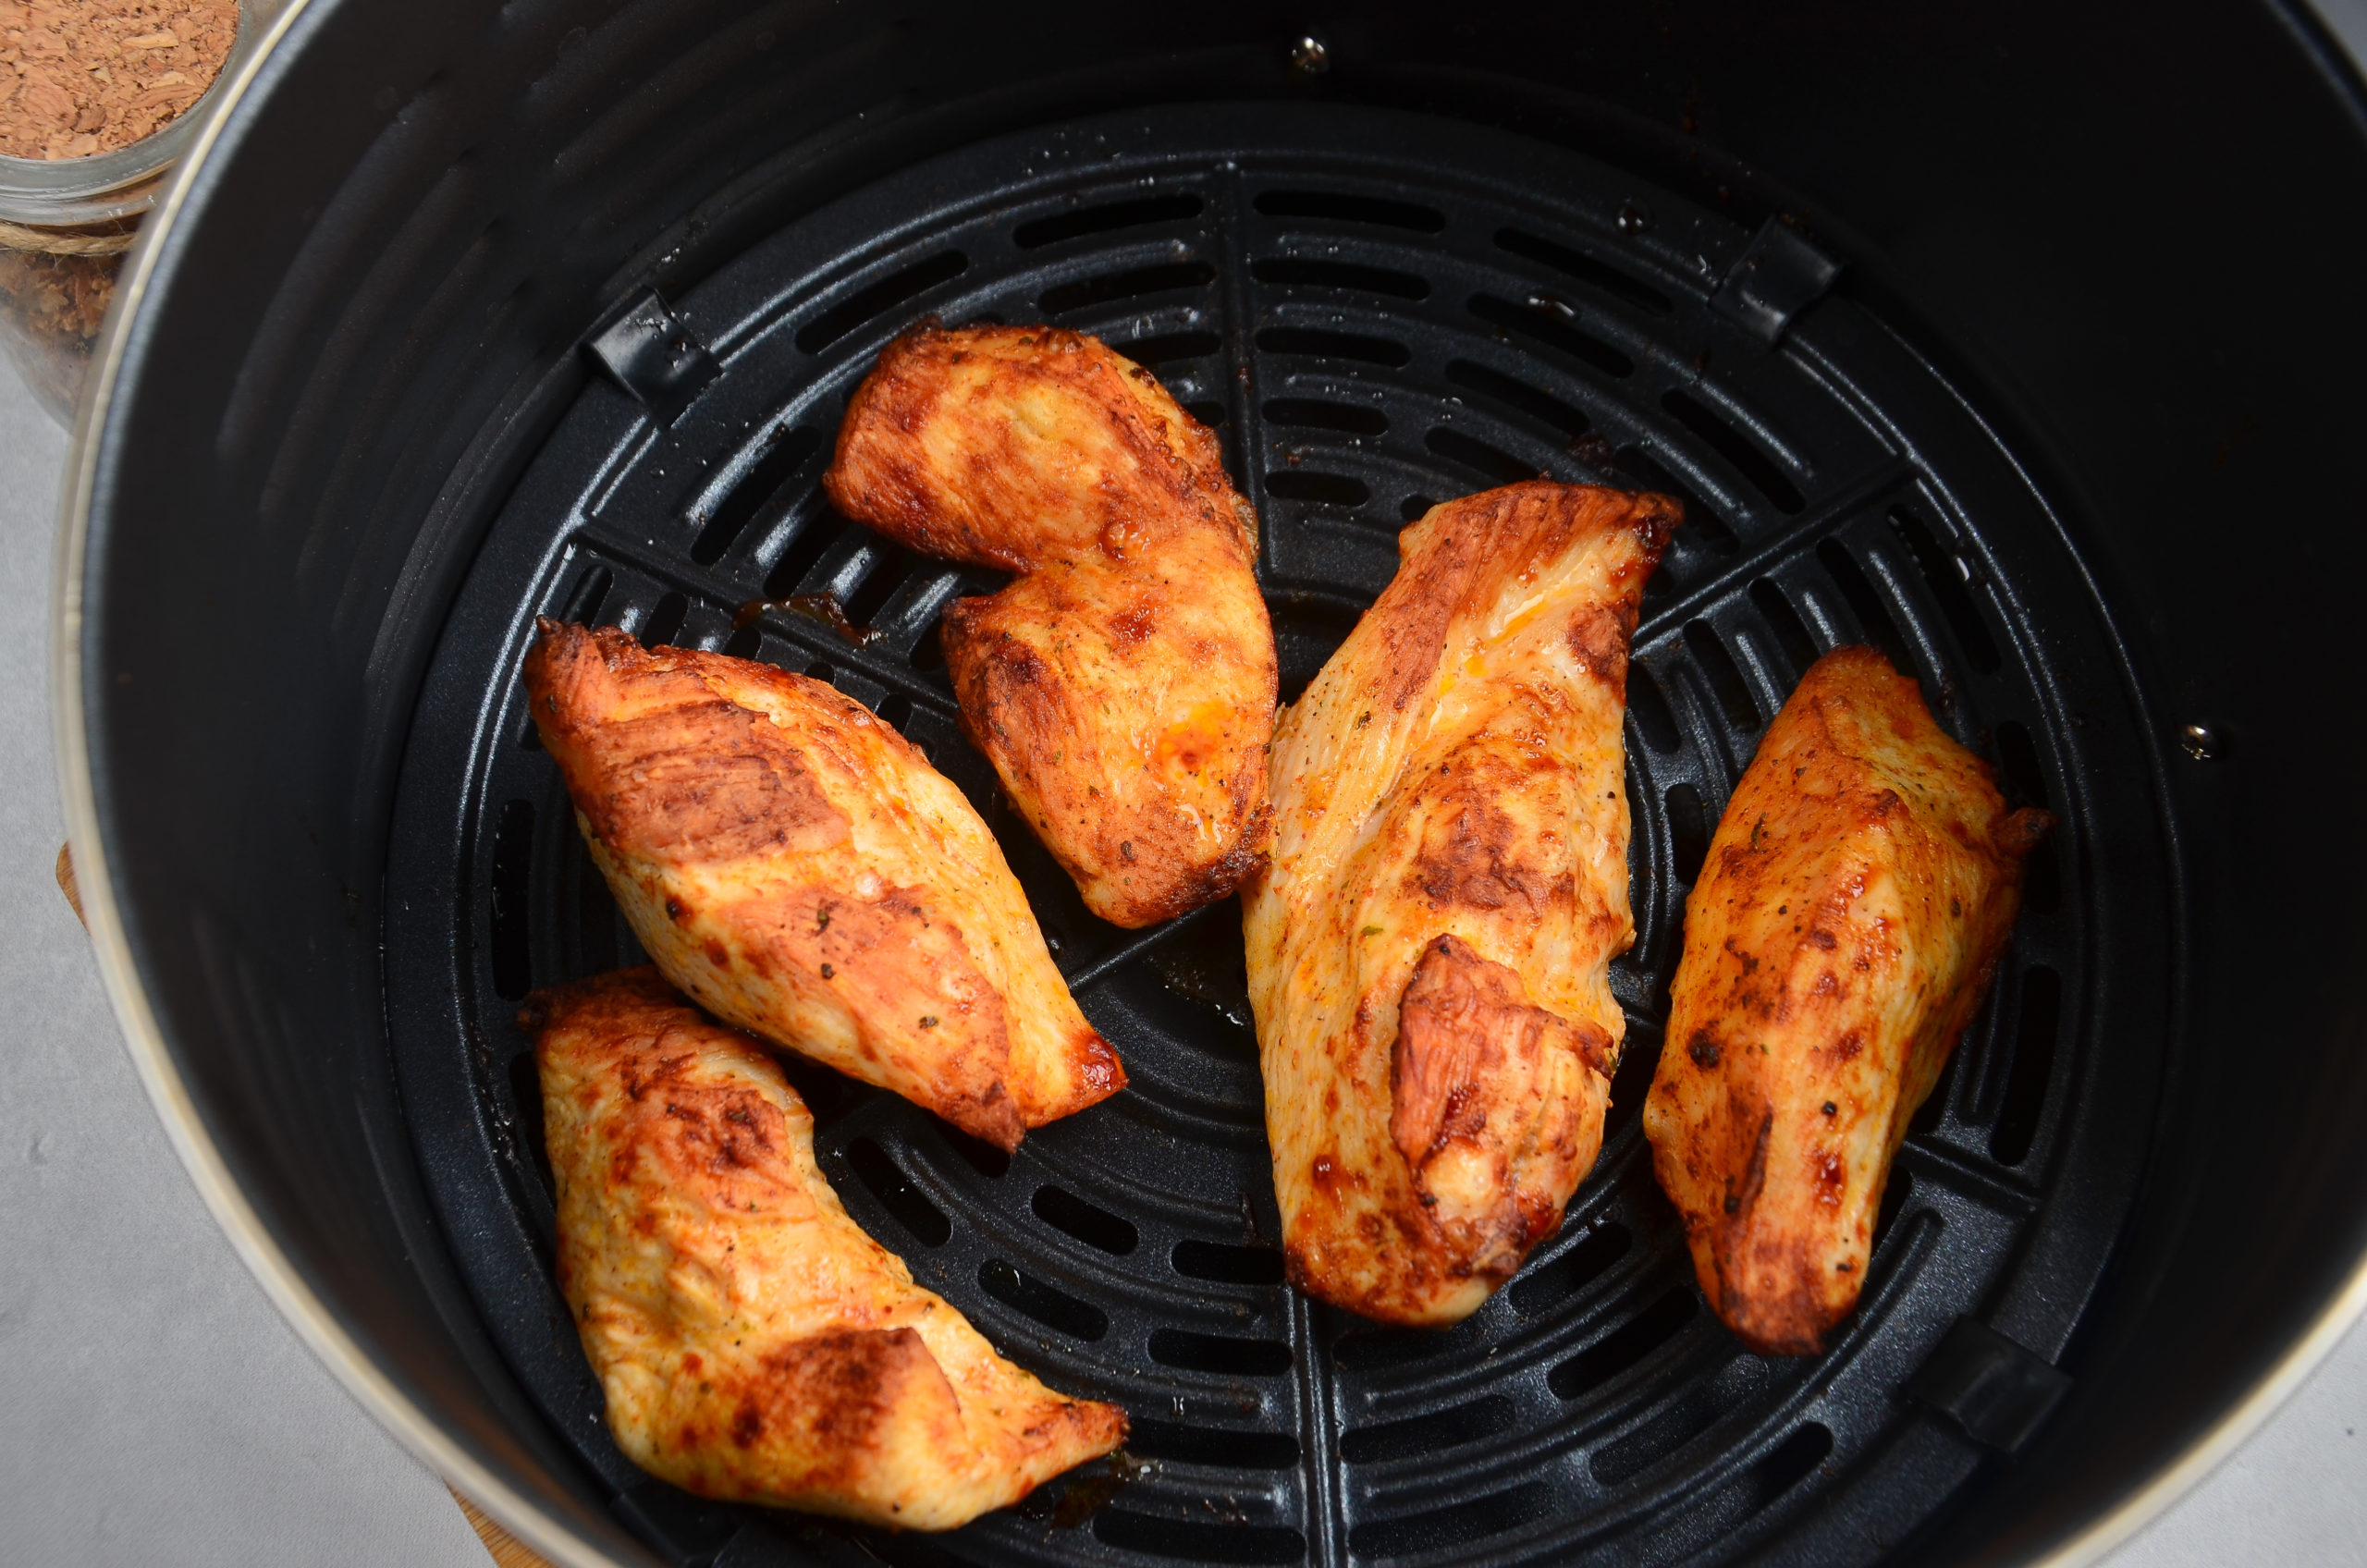 Cooked chicken in an air fryer